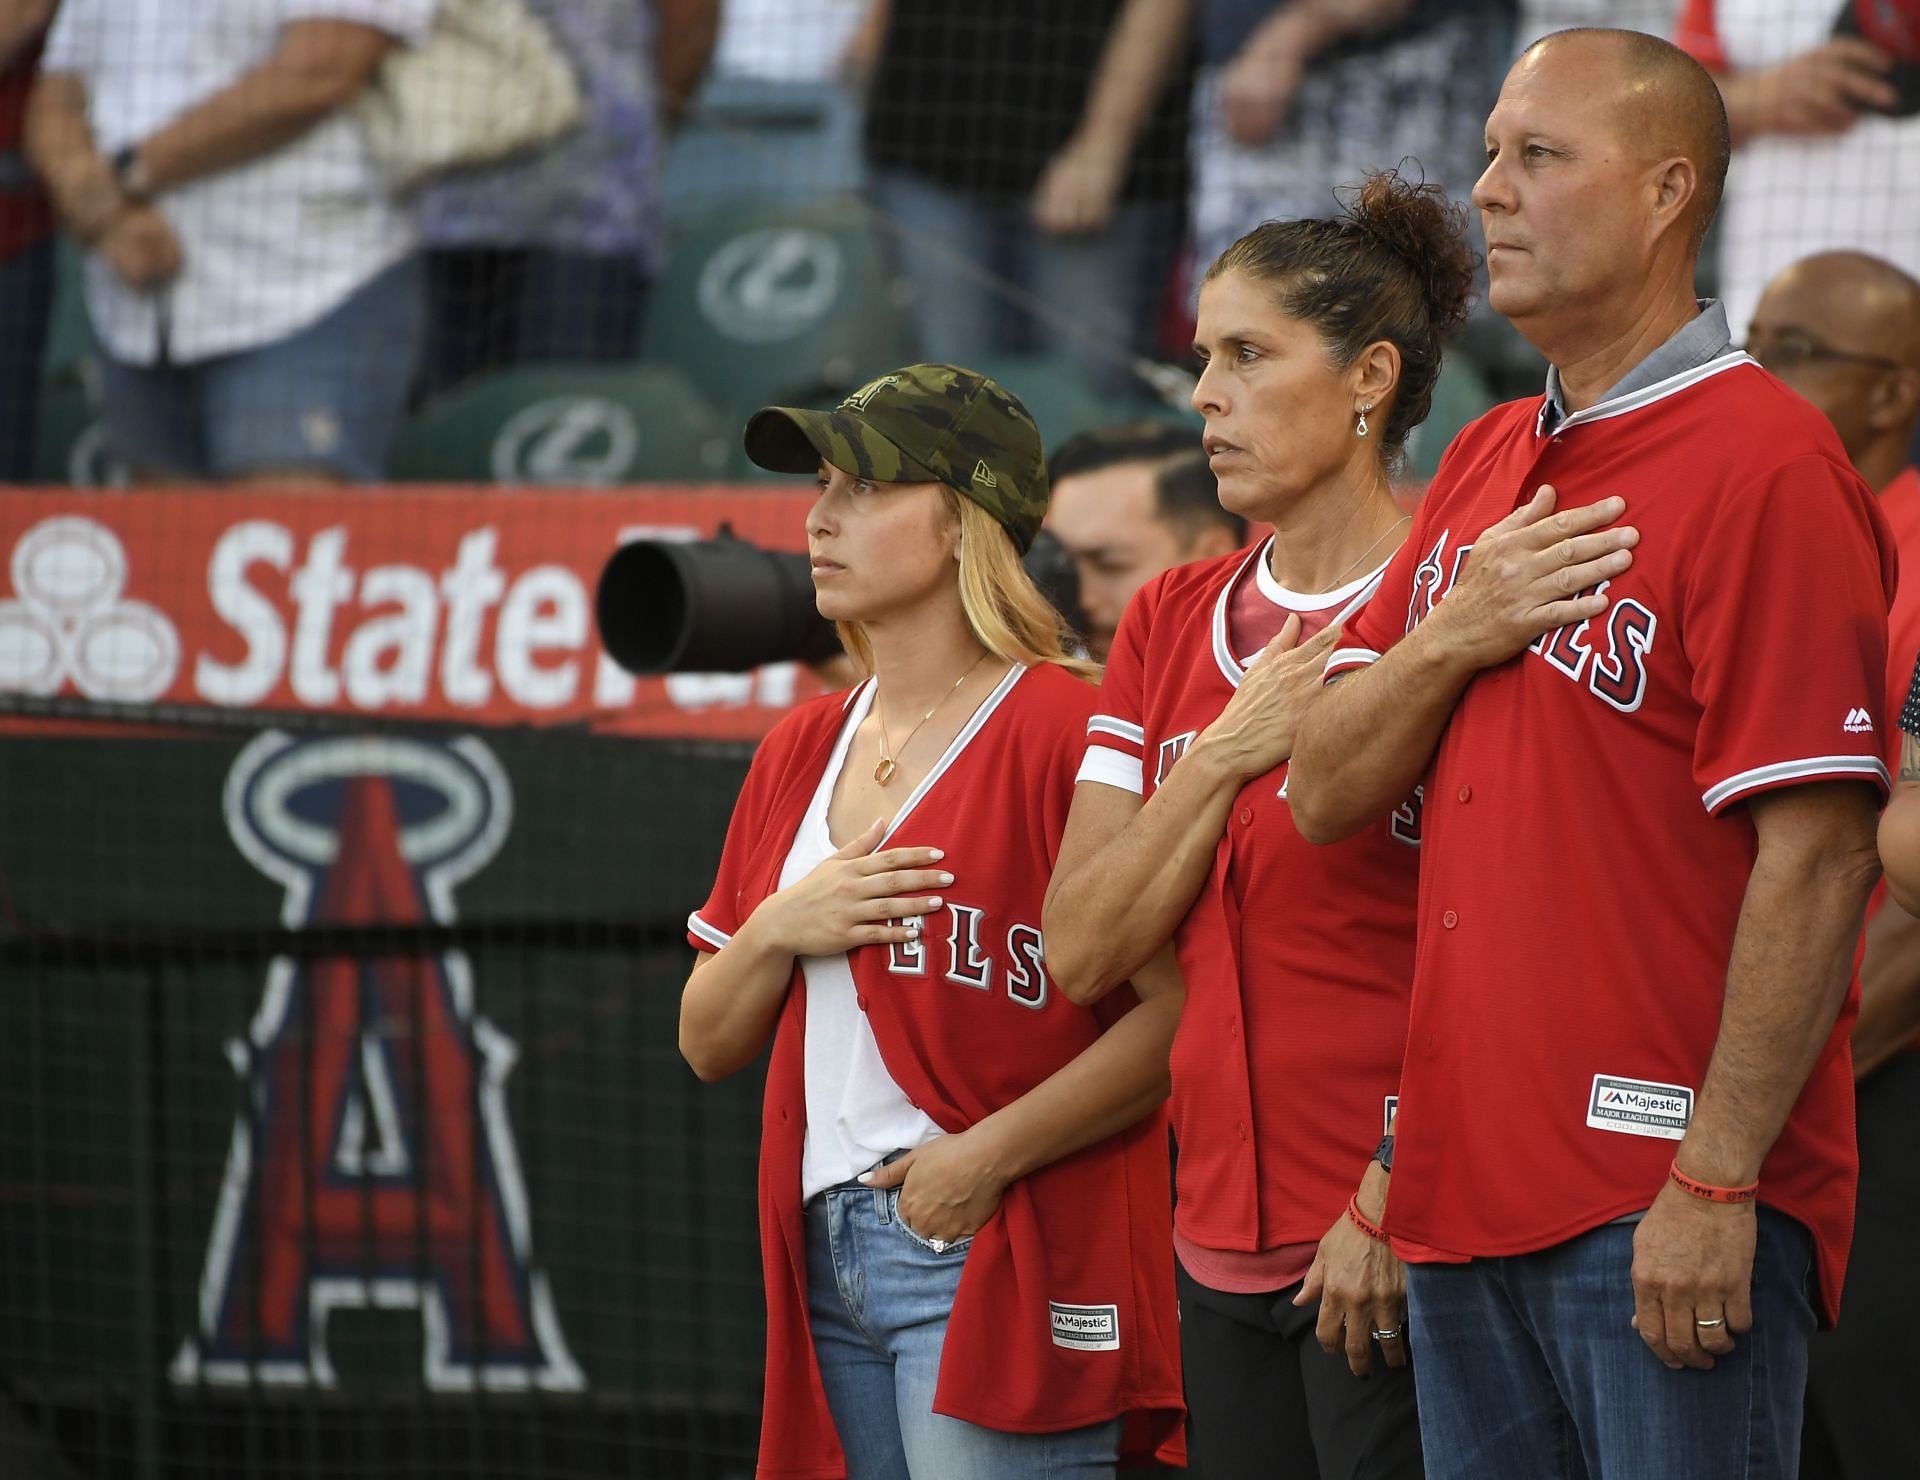 When LA Angels front-office employee Eric Kay's inflammatory